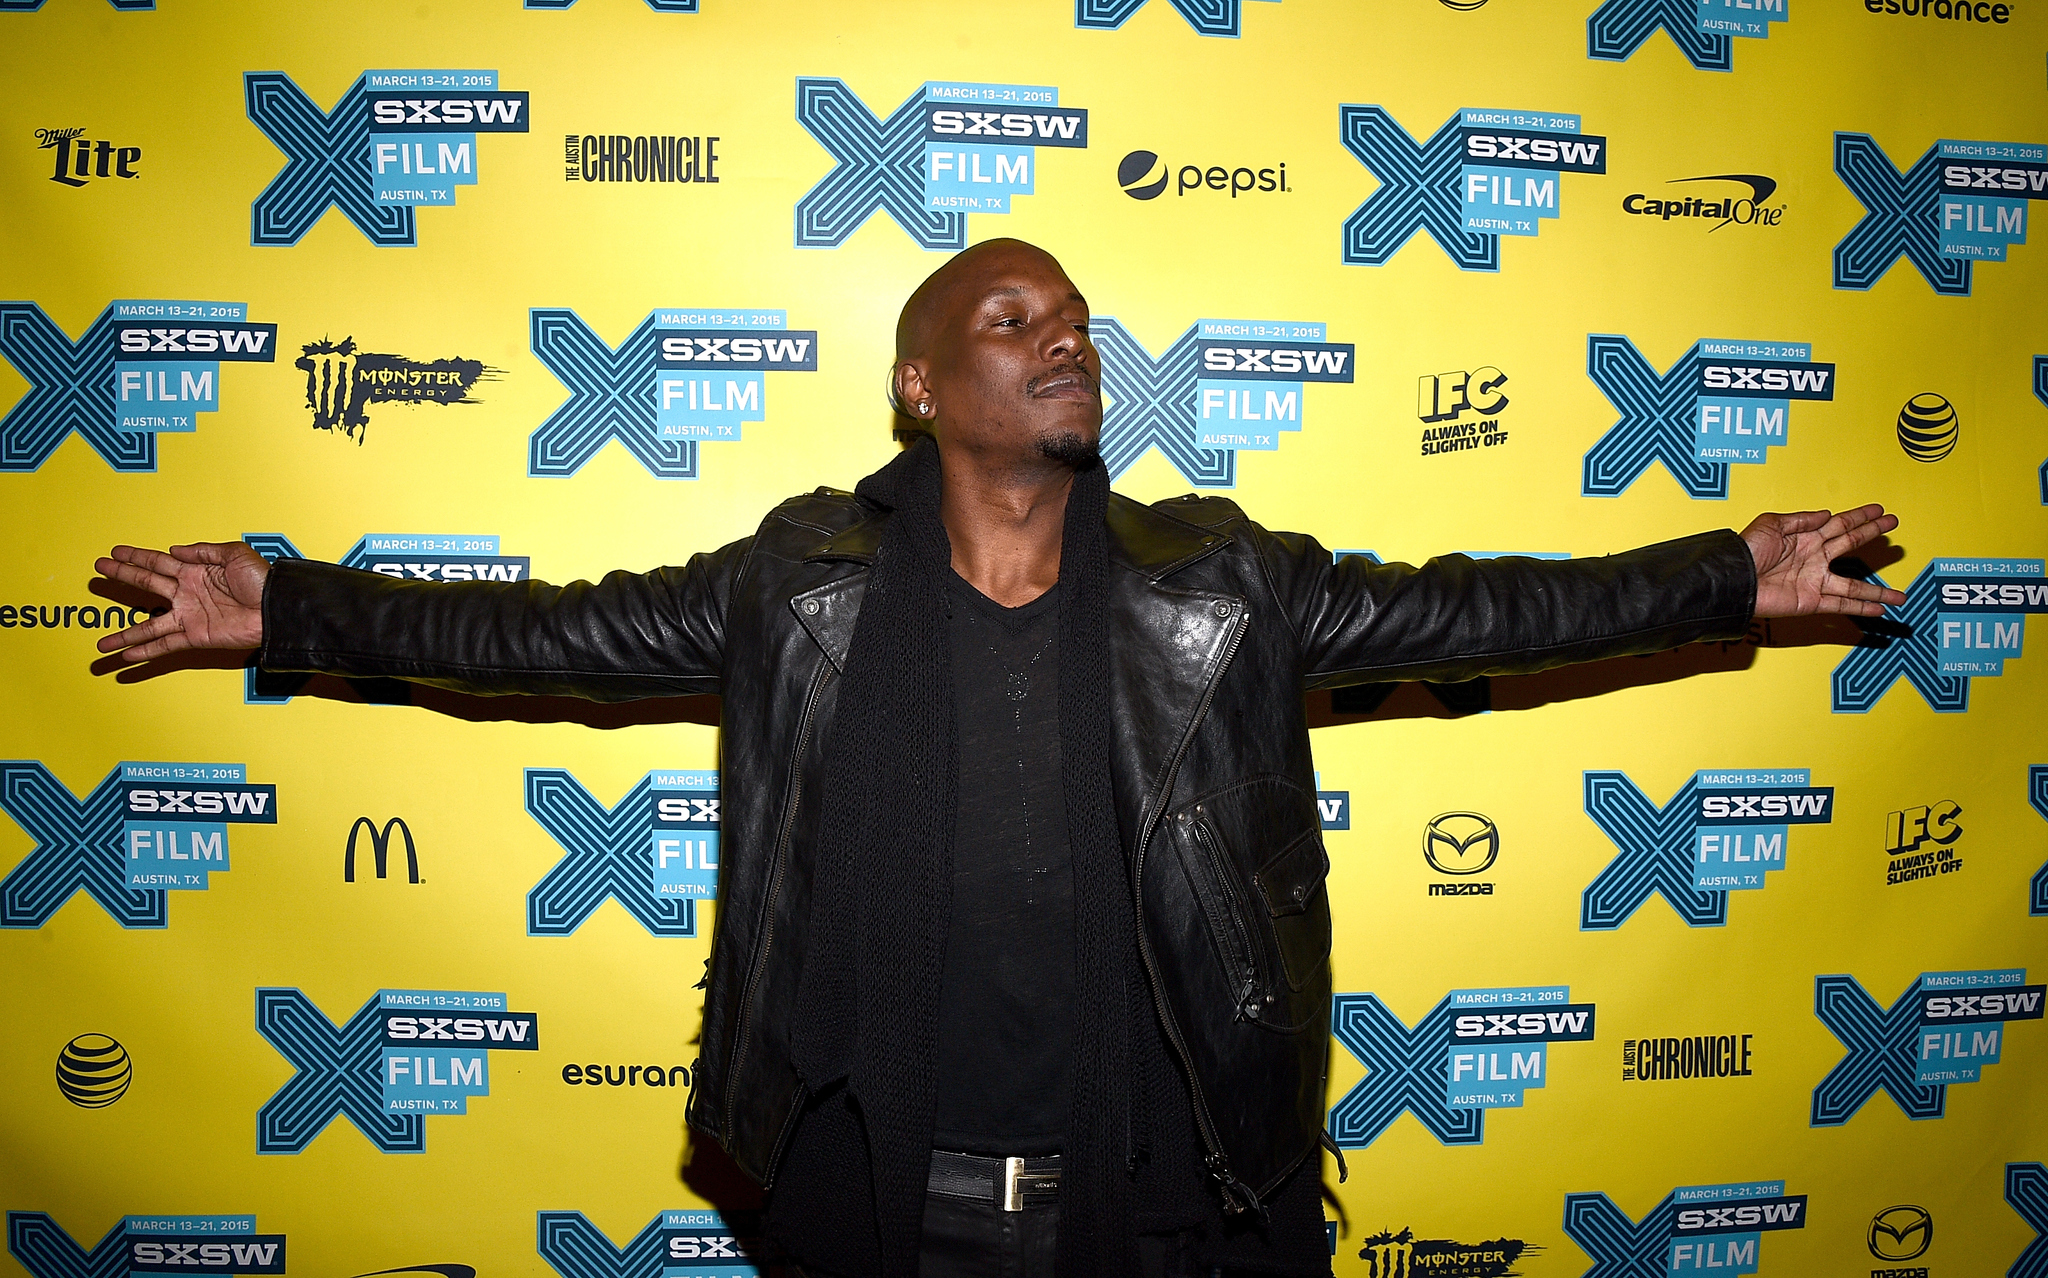 Tyrese Gibson at event of Greiti ir isiute 7 (2015)